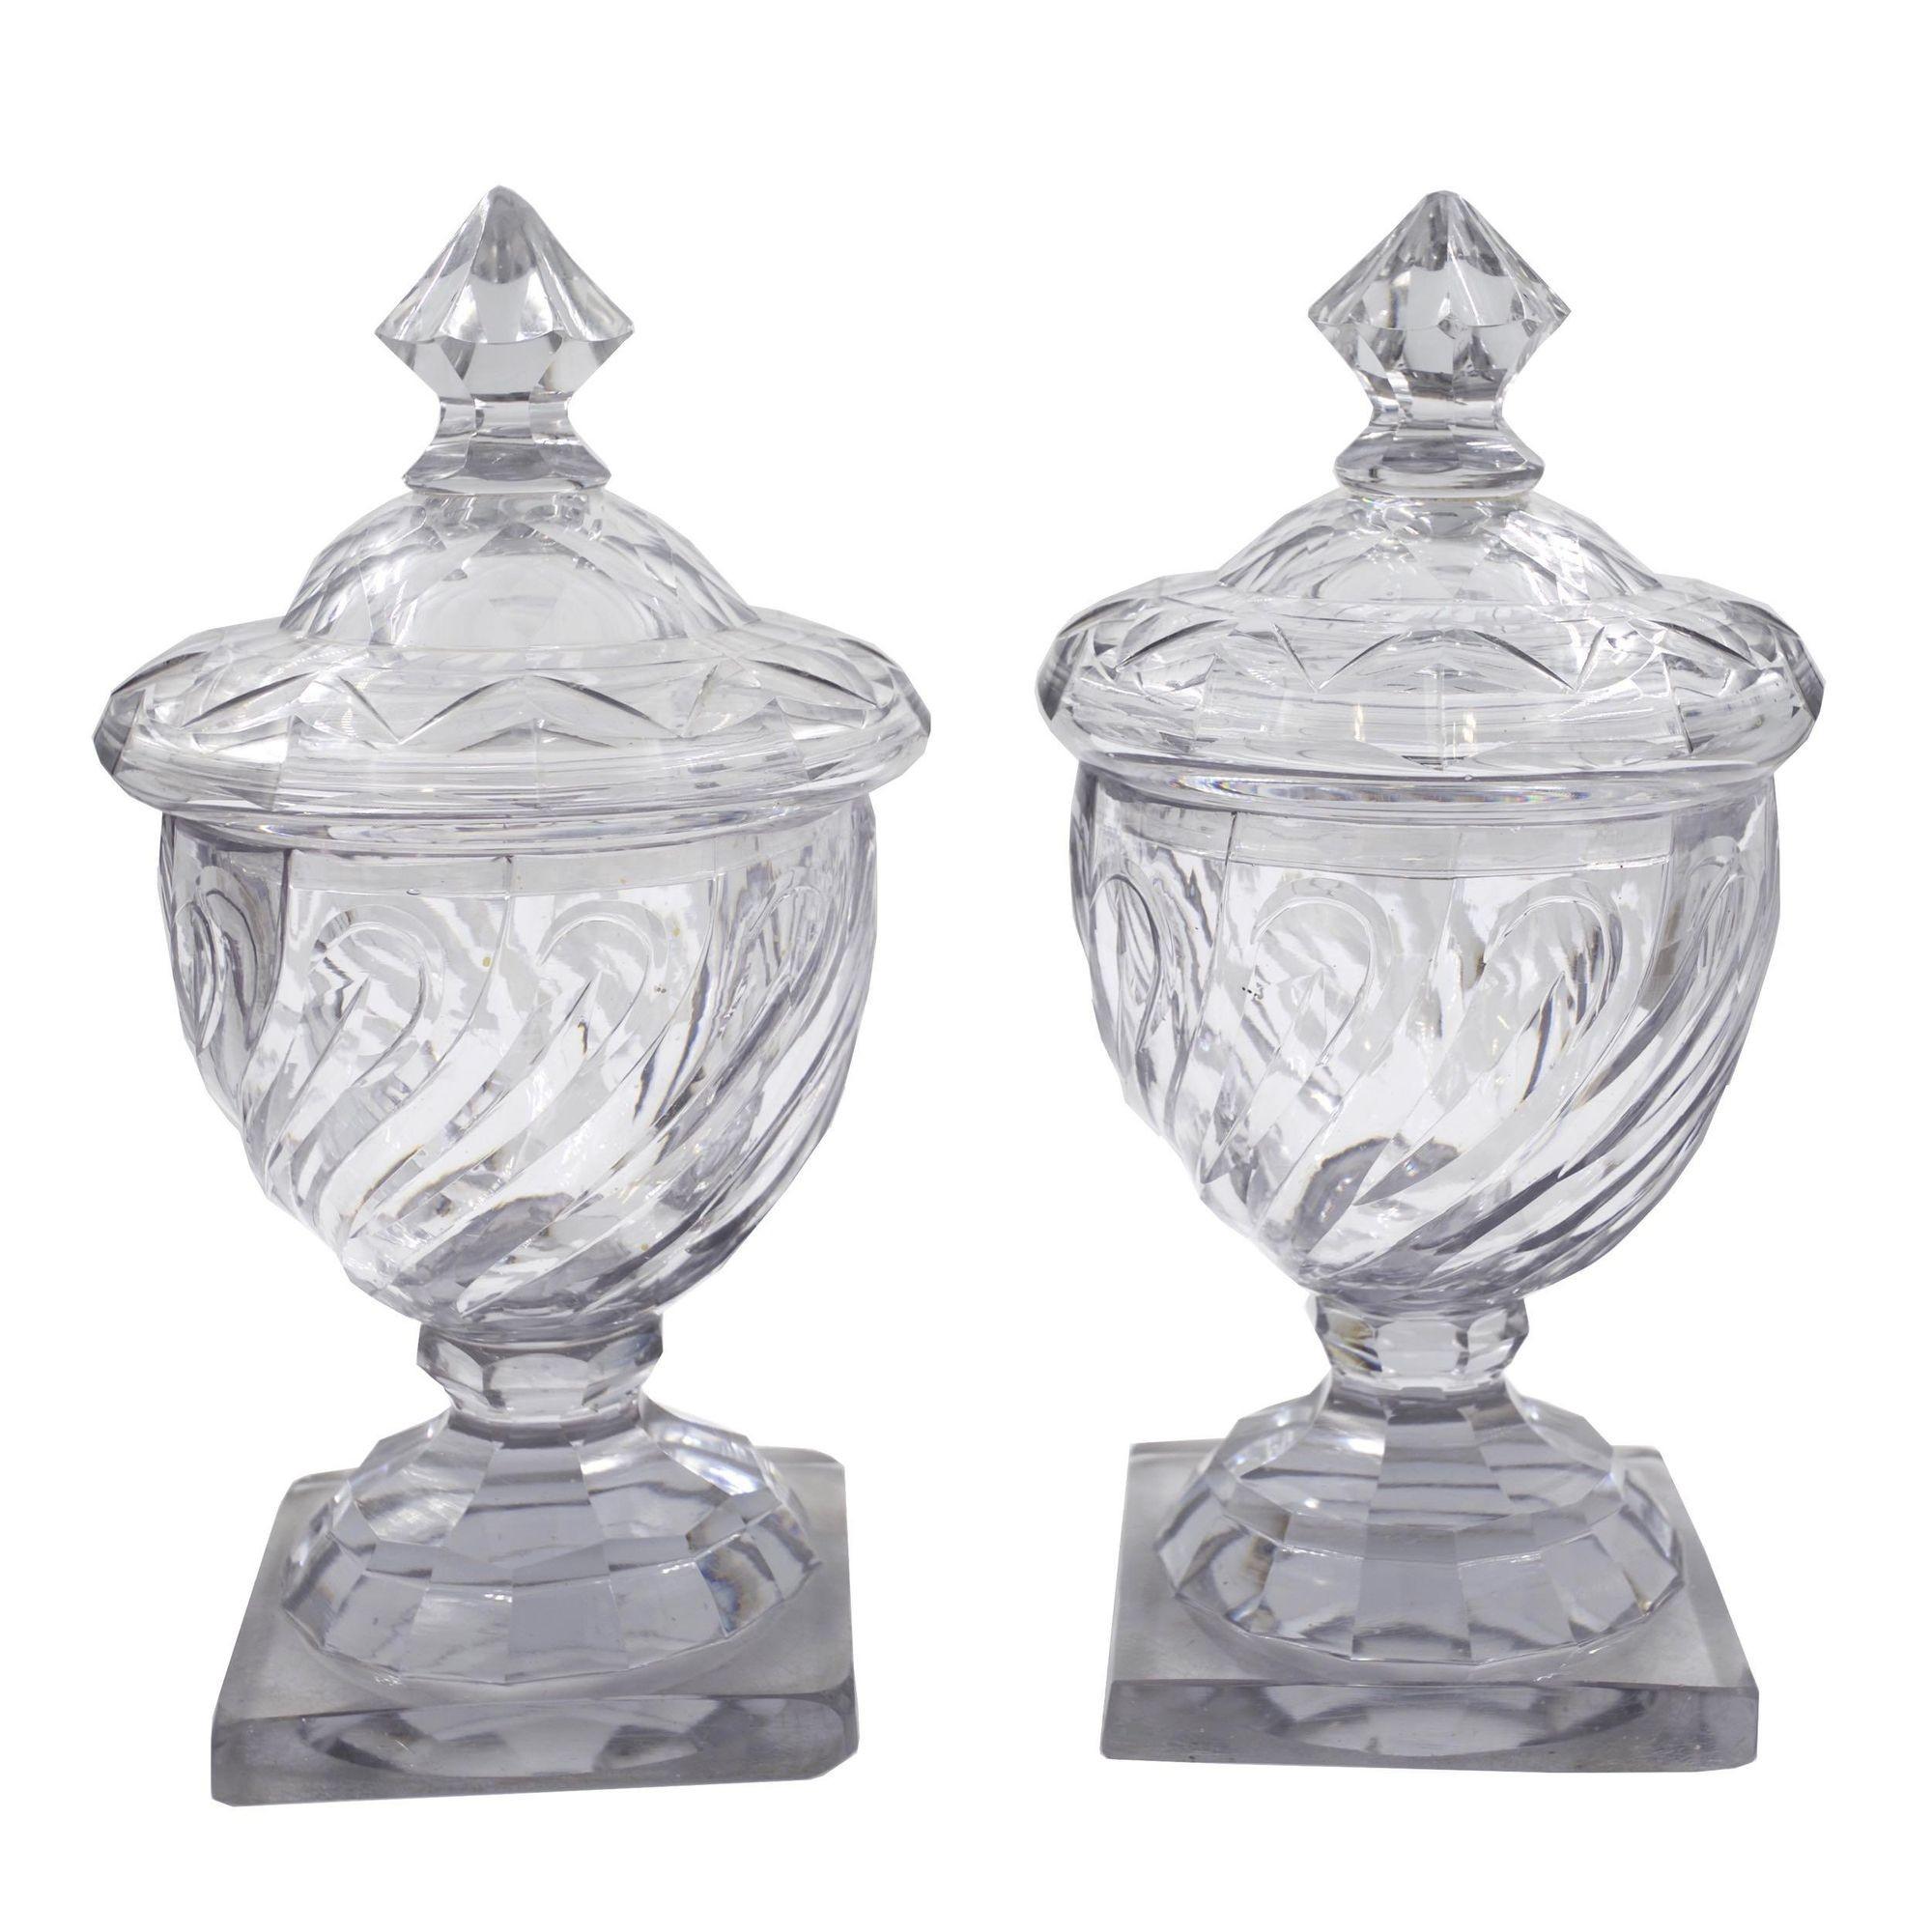 PAIR OF GEORGIAN SWIRLED CUT GLASS URNS WITH DOMED LIDS
Circa late 18th century, probably English
Item # C104029

A fine pair of late 18th century Georgian cut glass urns with domed lids, they exhibit a marvelous swirled design in the faceted